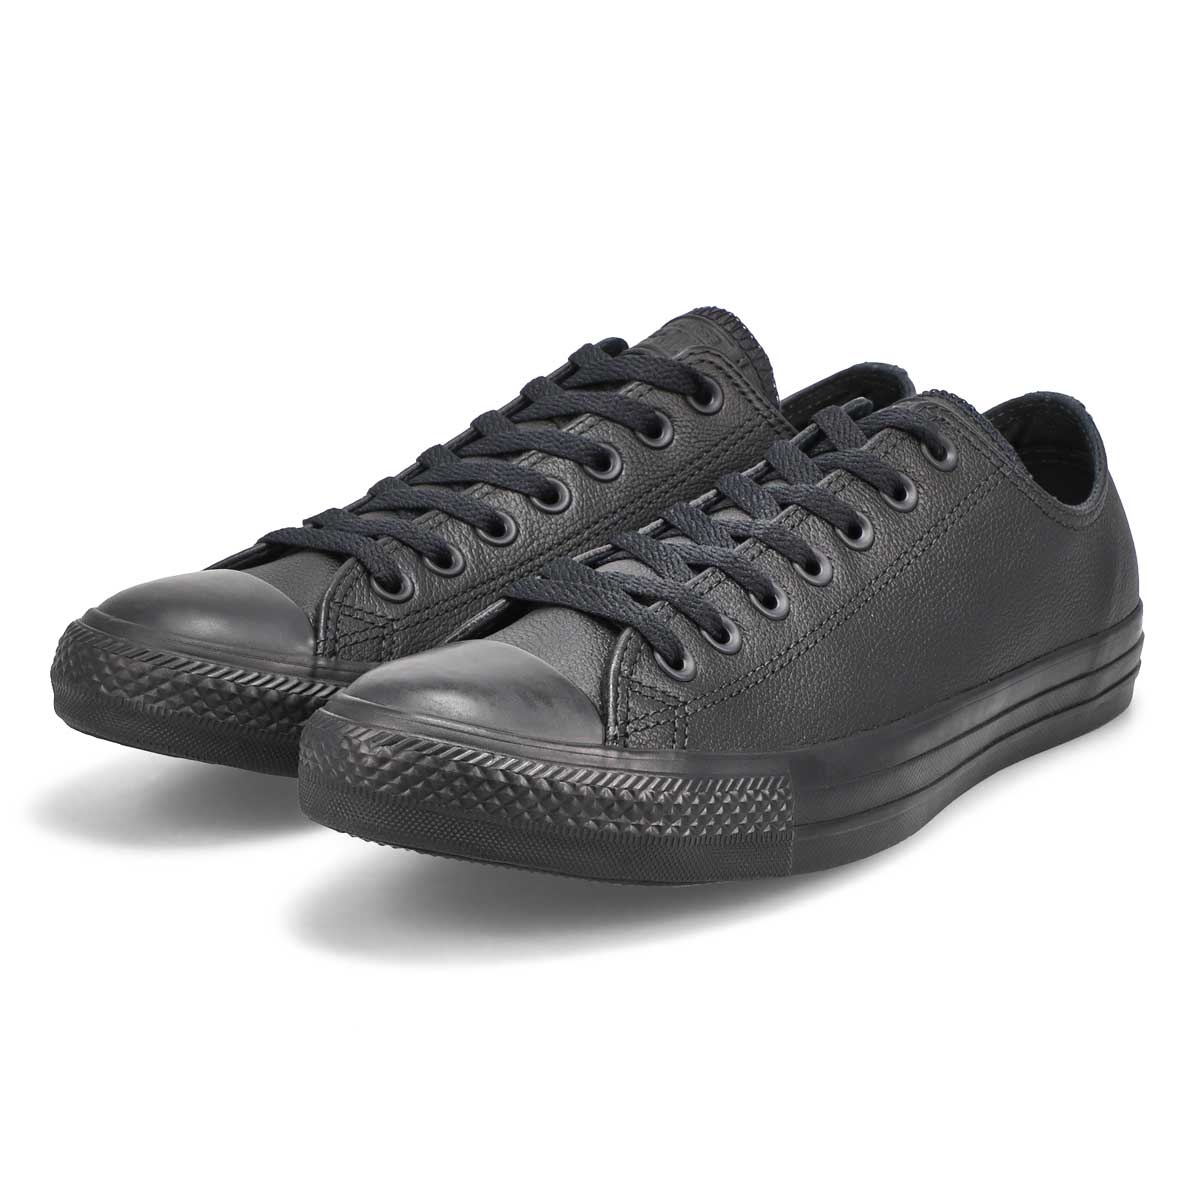 Men's Chuck Taylor All Star Leather Sneaker- Black